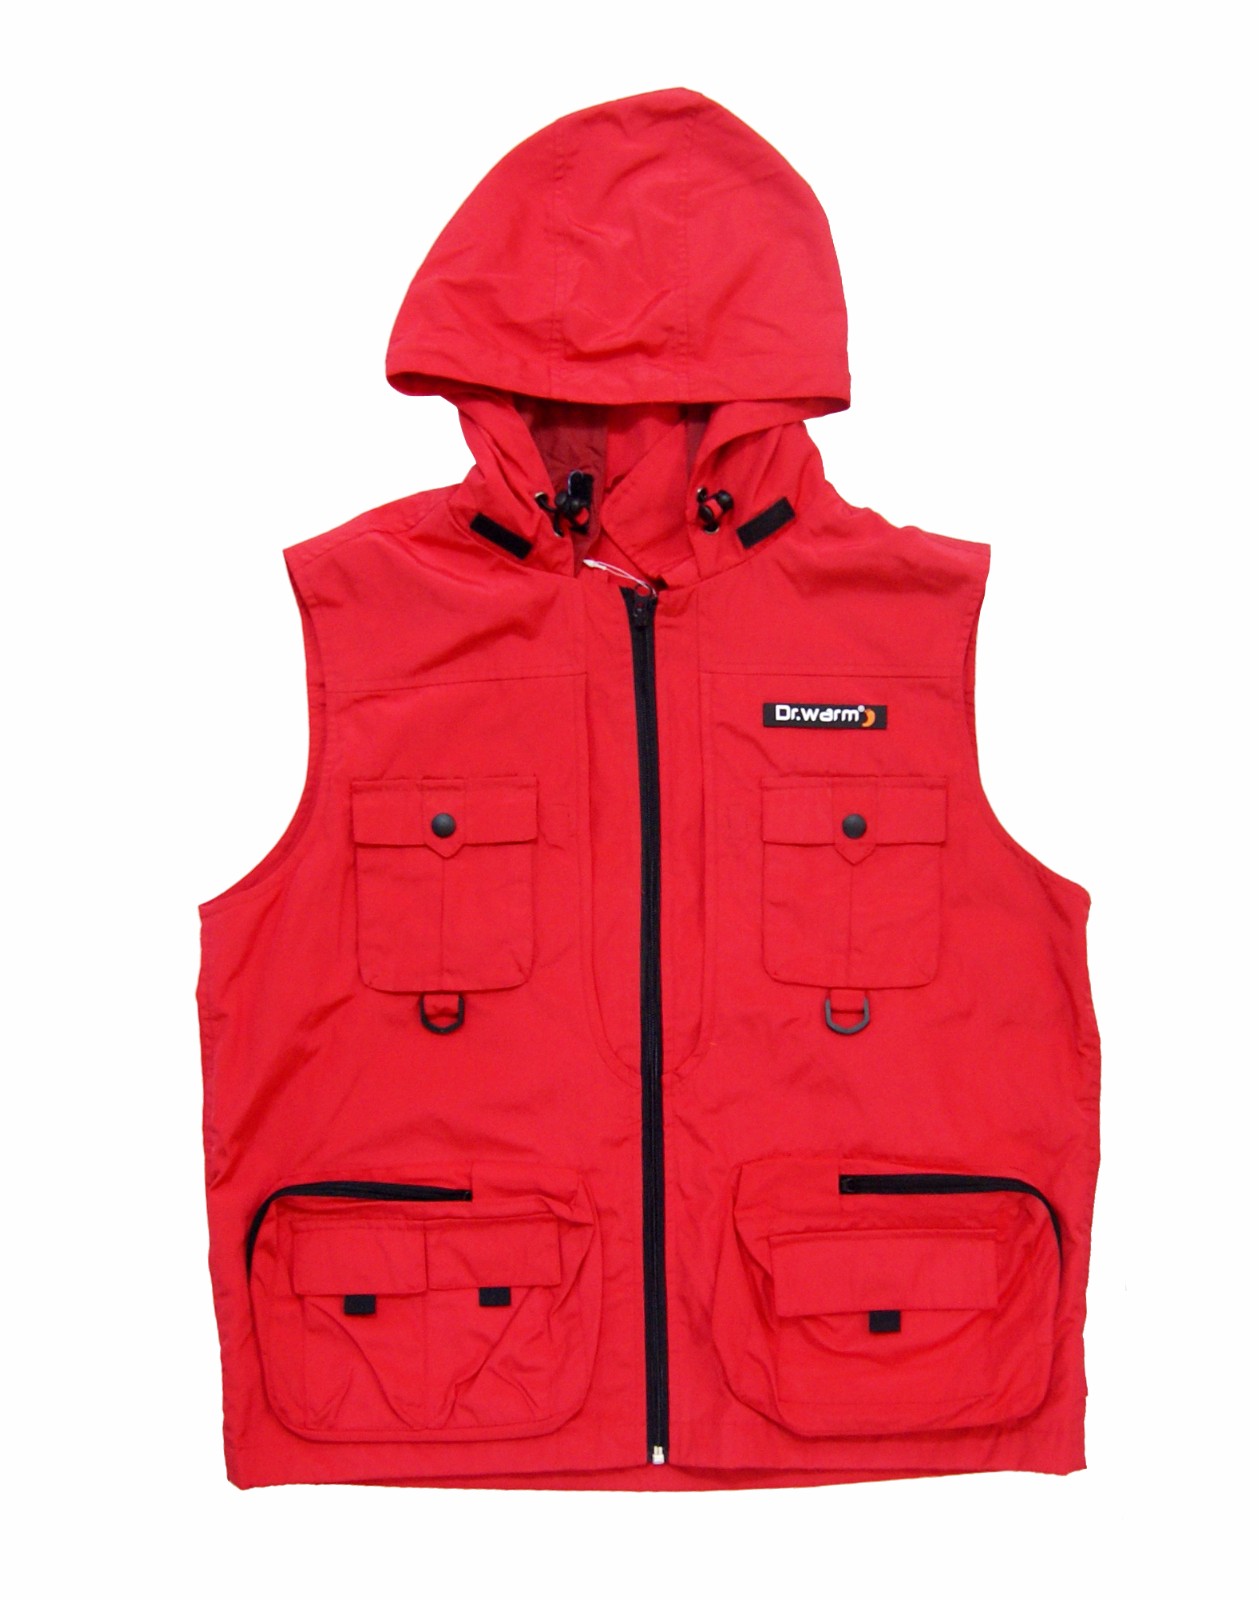 Dr. Warm heated battery operated heated vest keep you warm all day for outdoor-9